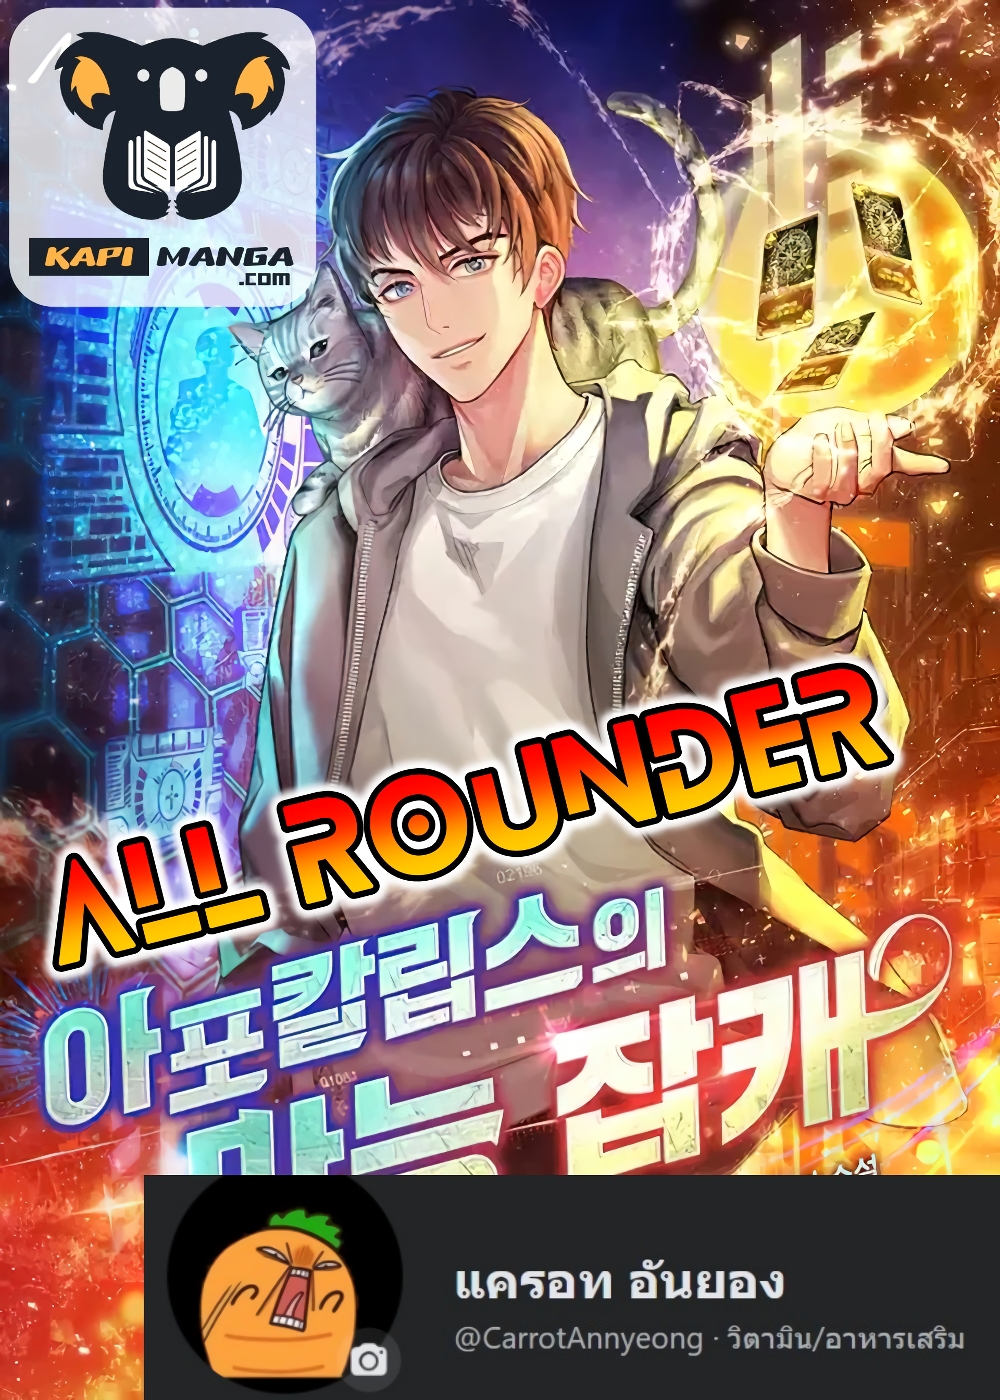 All Rounder 11 001